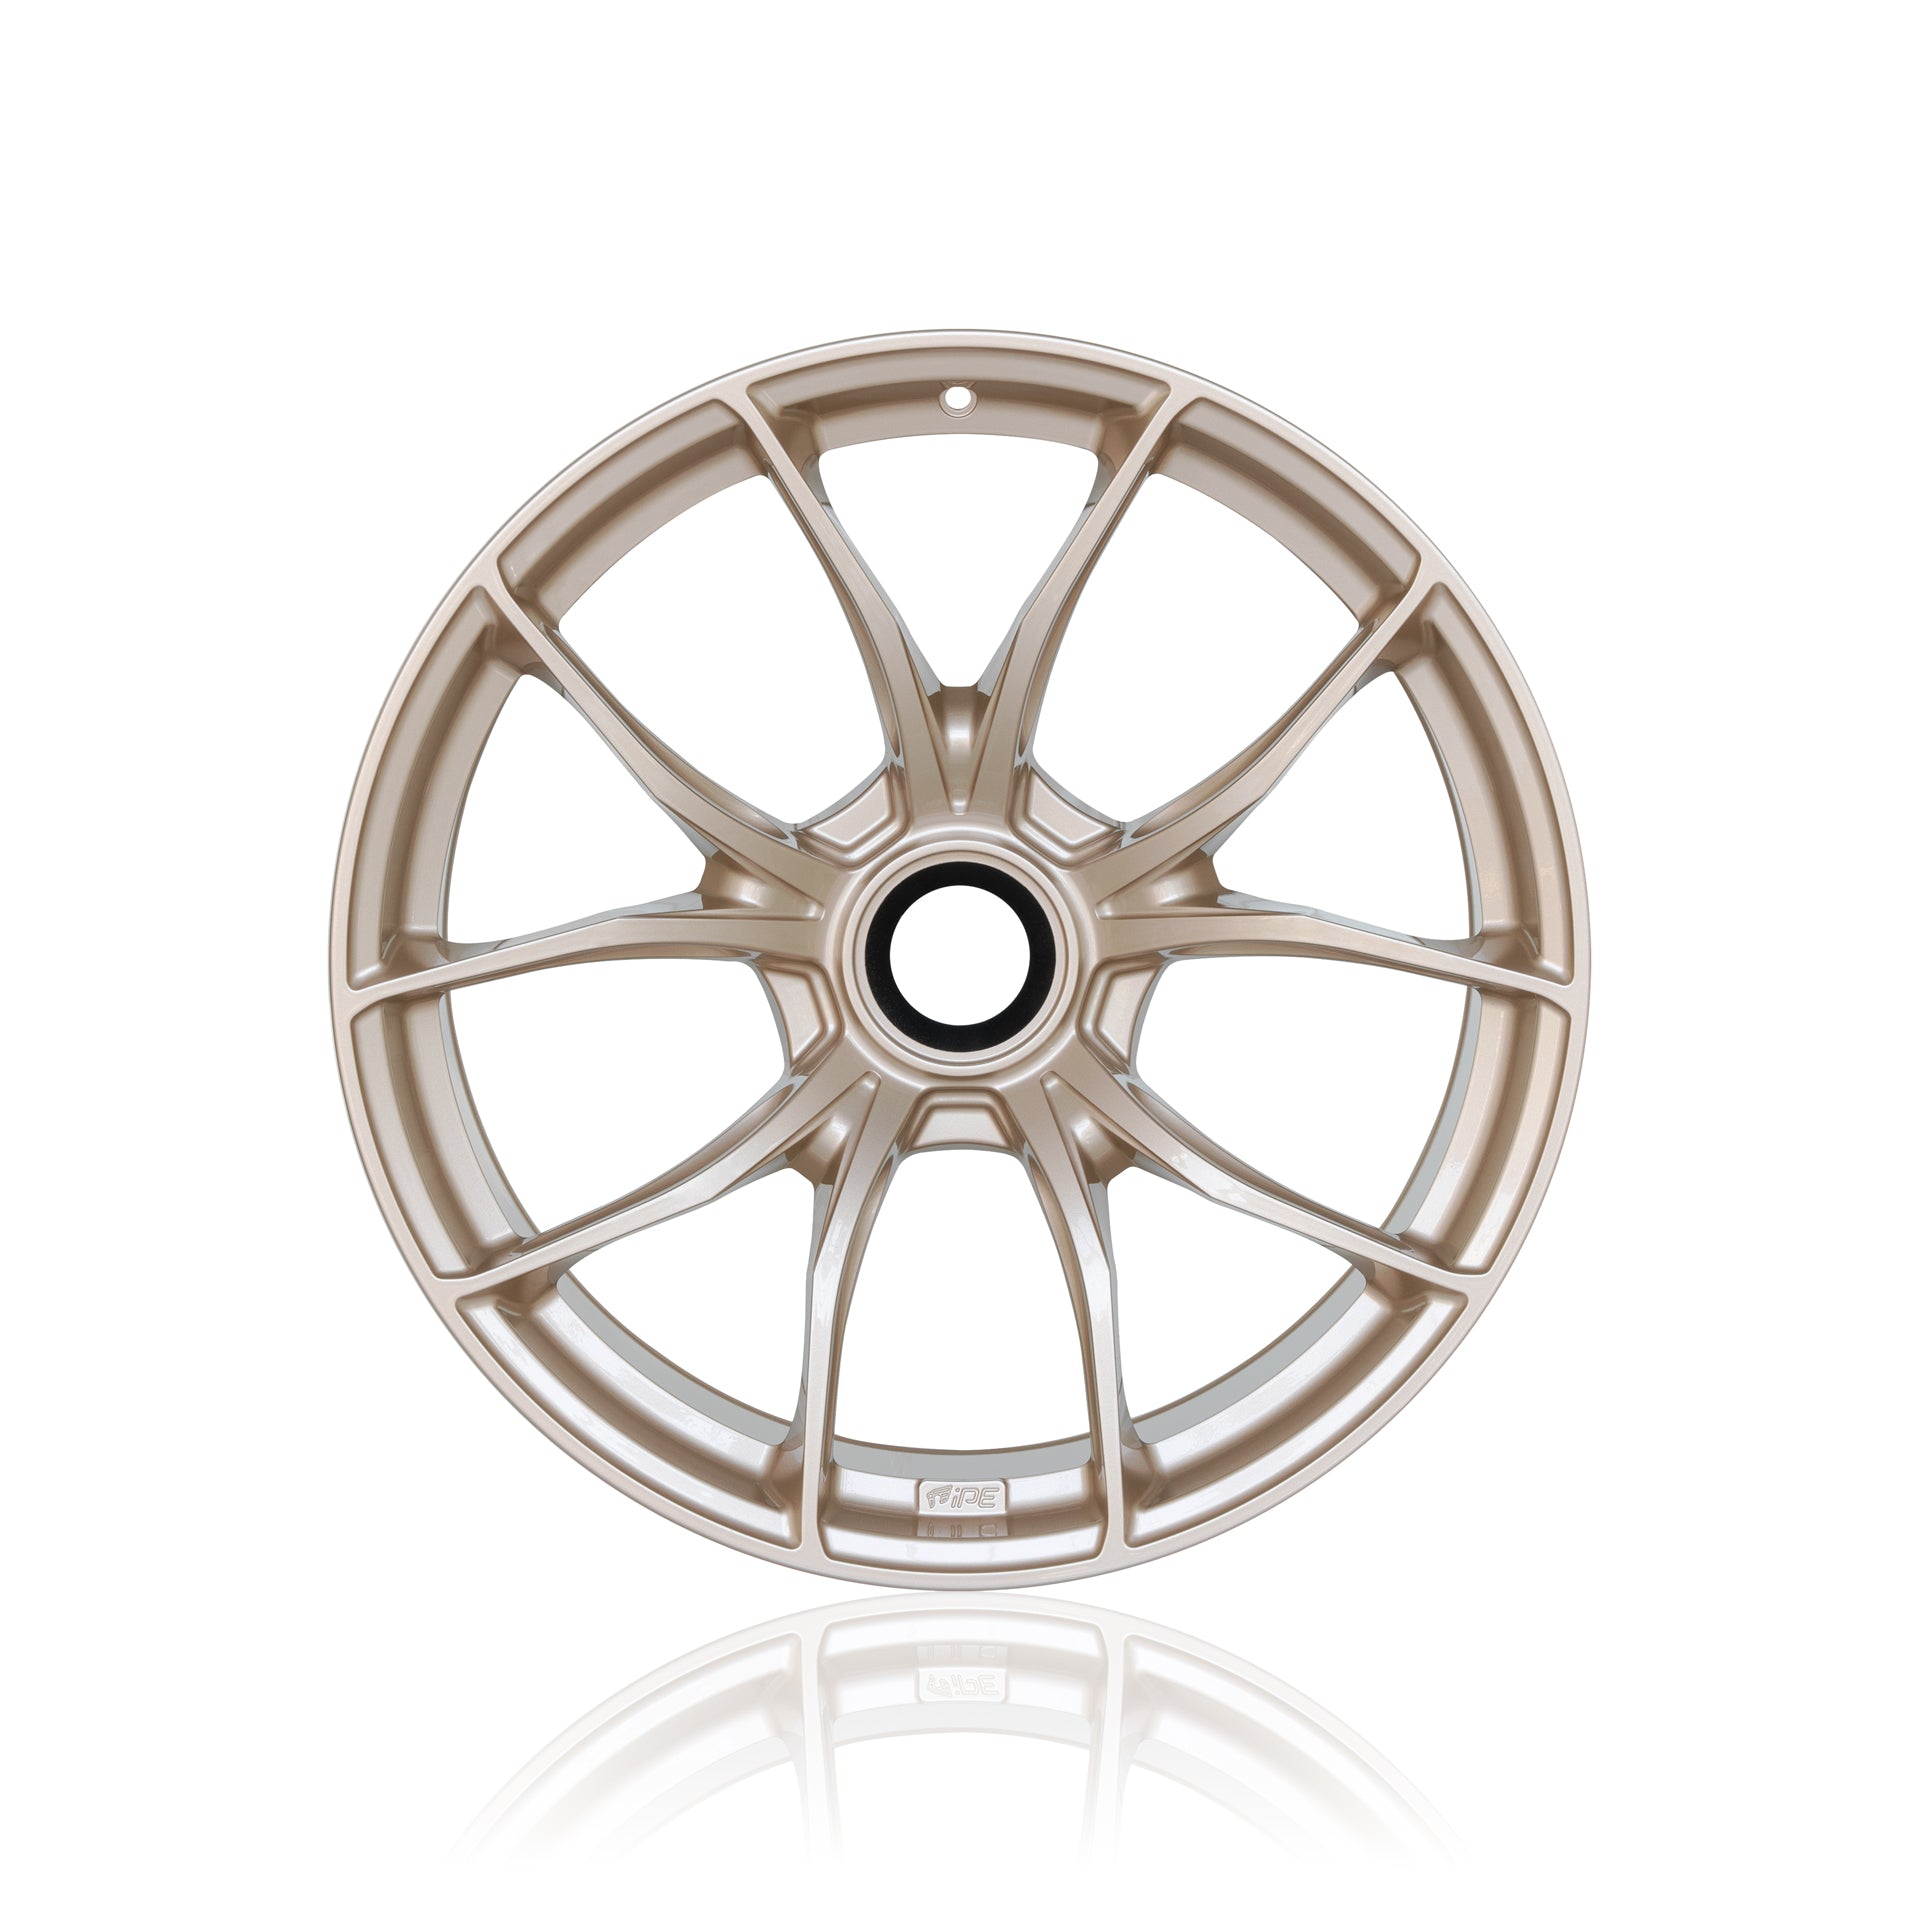 Front view of a light bronze IPE MFR-01 Magnesium wheel on a white background